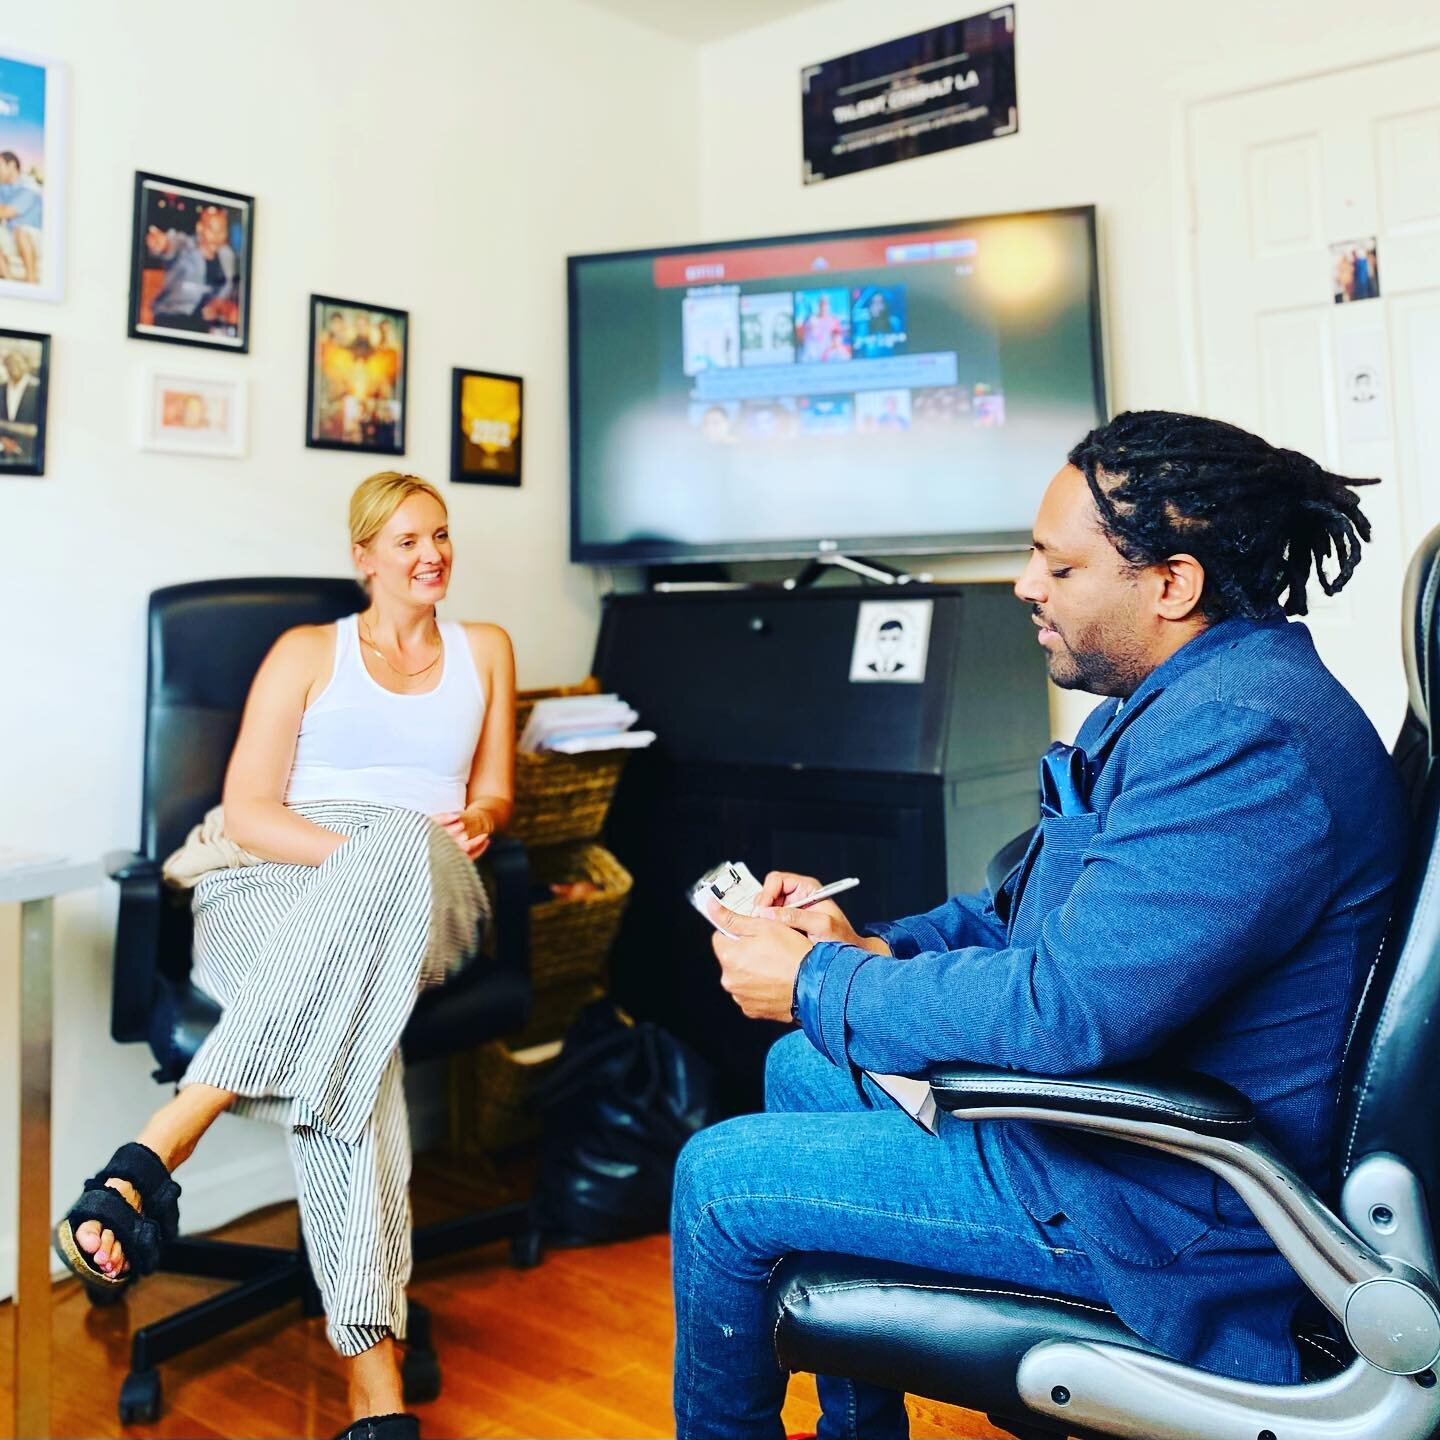 Preparing for the best possible agent meeting. 

International model and actress Marlene Landauer crushing it 🎥 

Check out her guest-star role opposite Hugh Dancy on Hulu&rsquo;s &ldquo;The Path&rdquo;

#actor #actress #onset #actors #actingtips #s